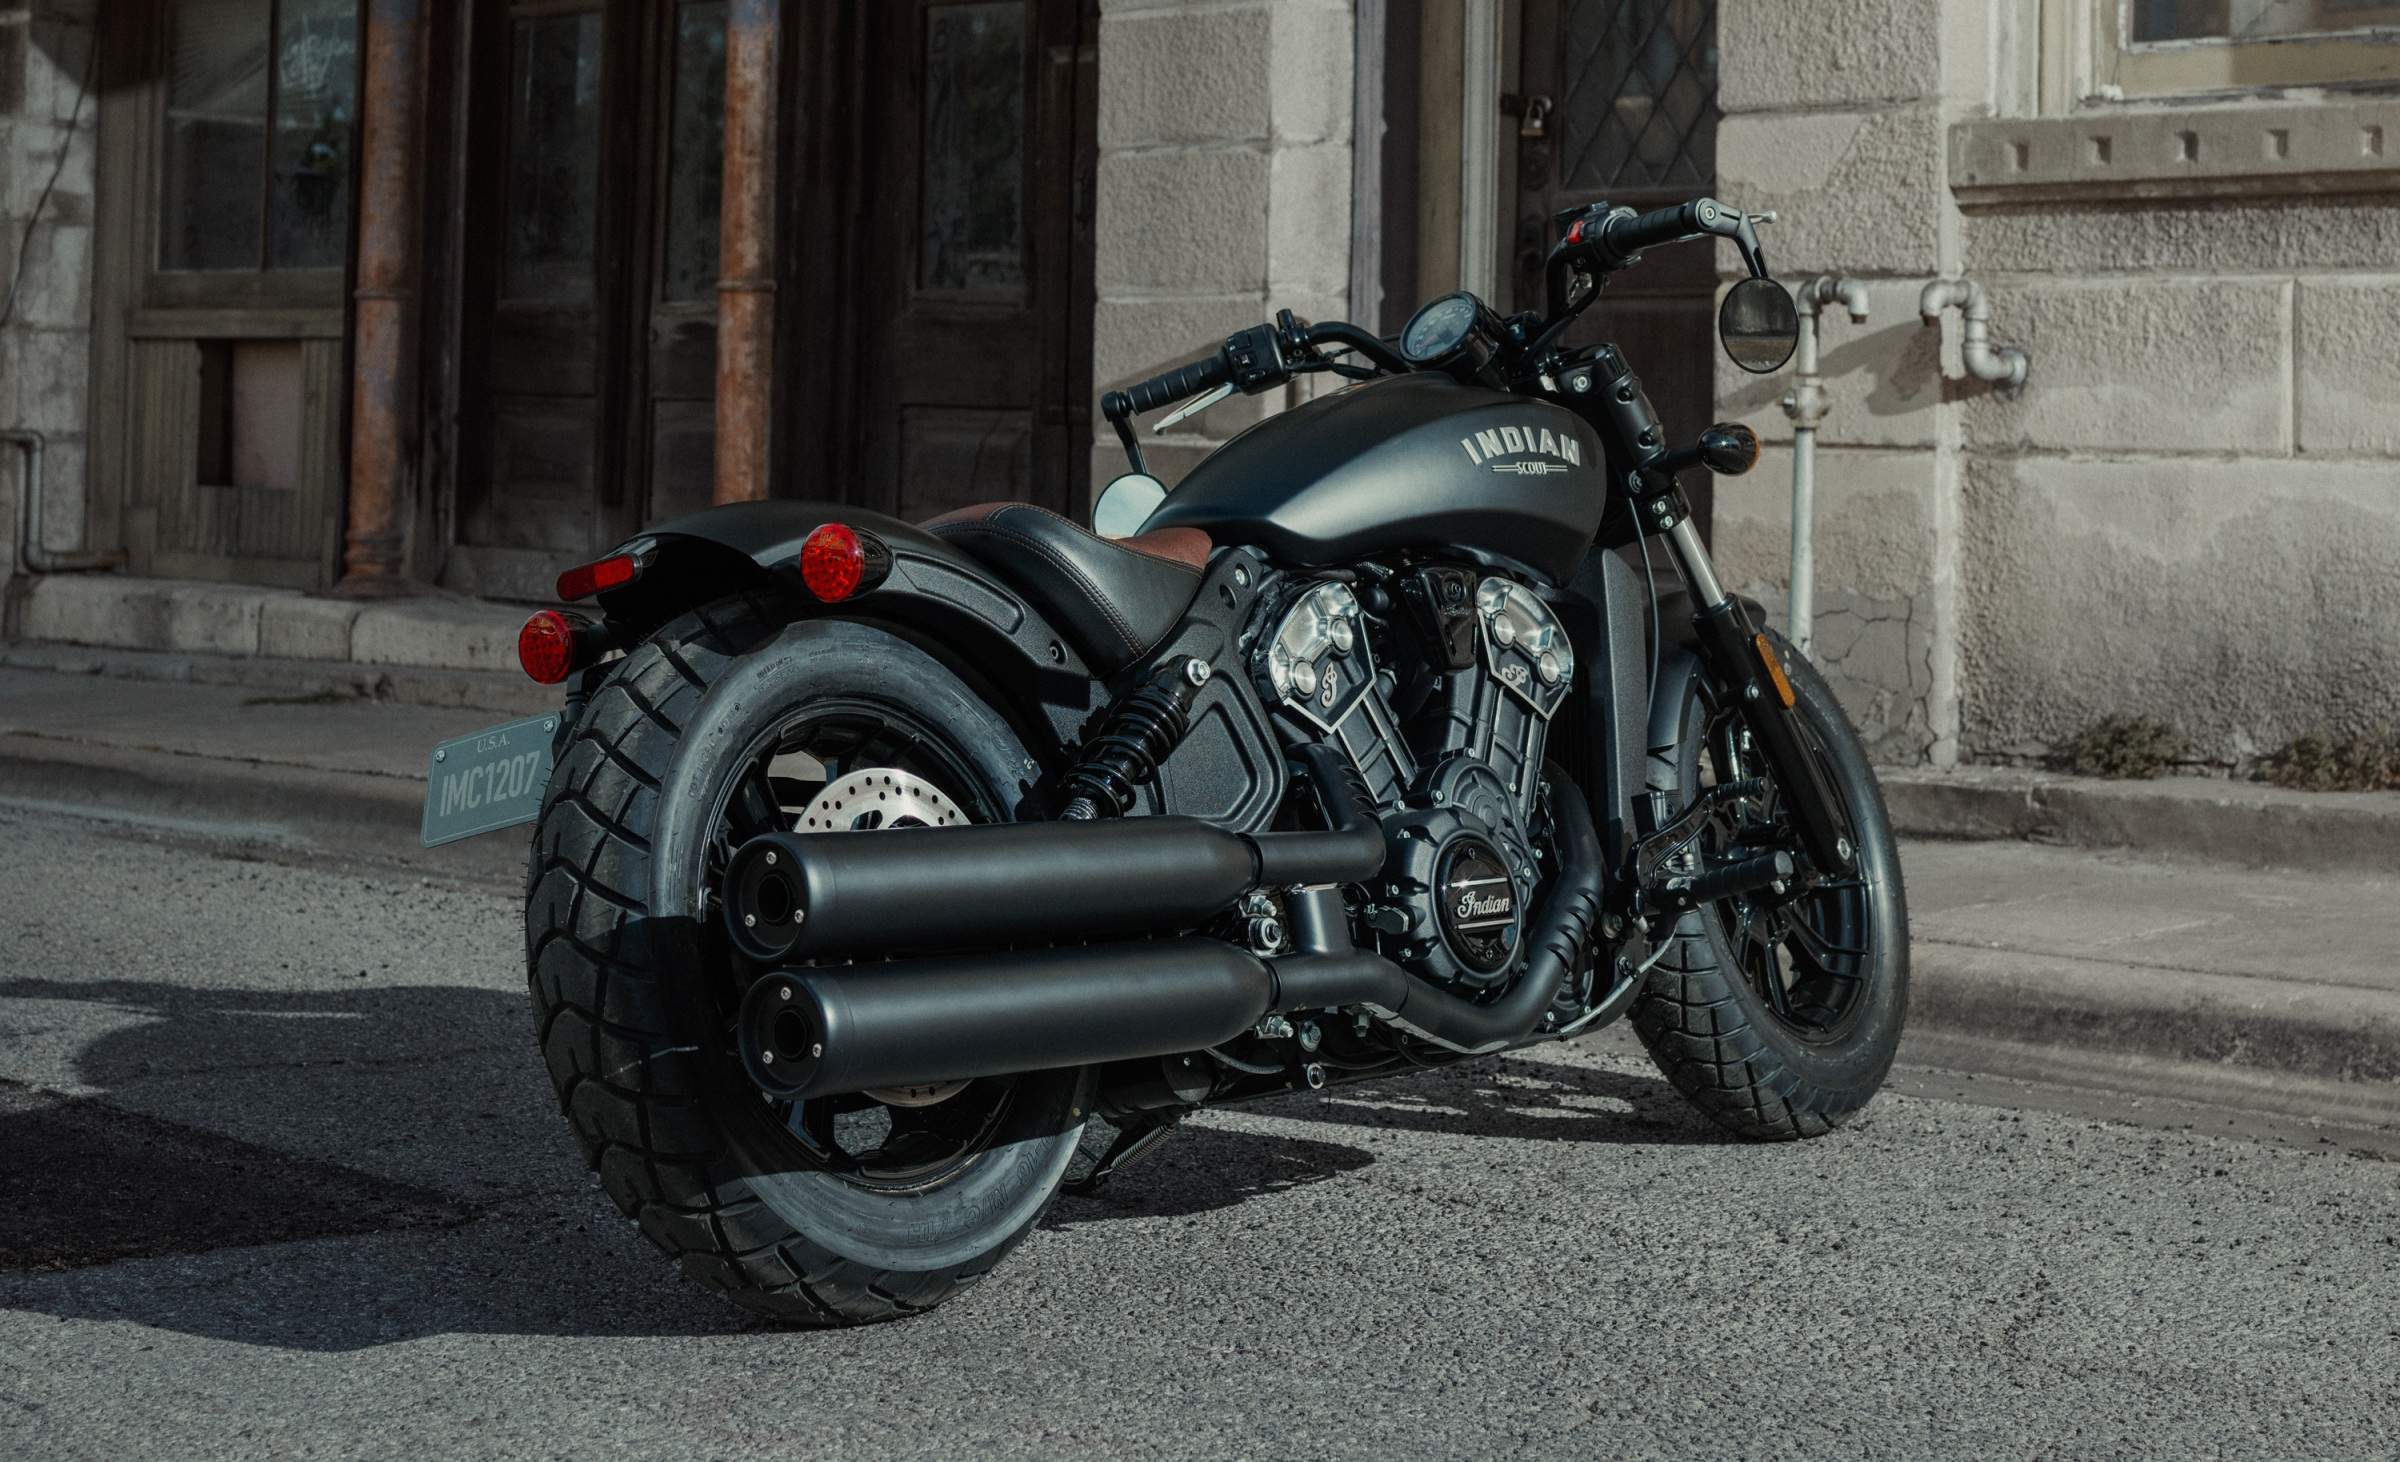 Ride review: 2018 Indian Scout Bobber